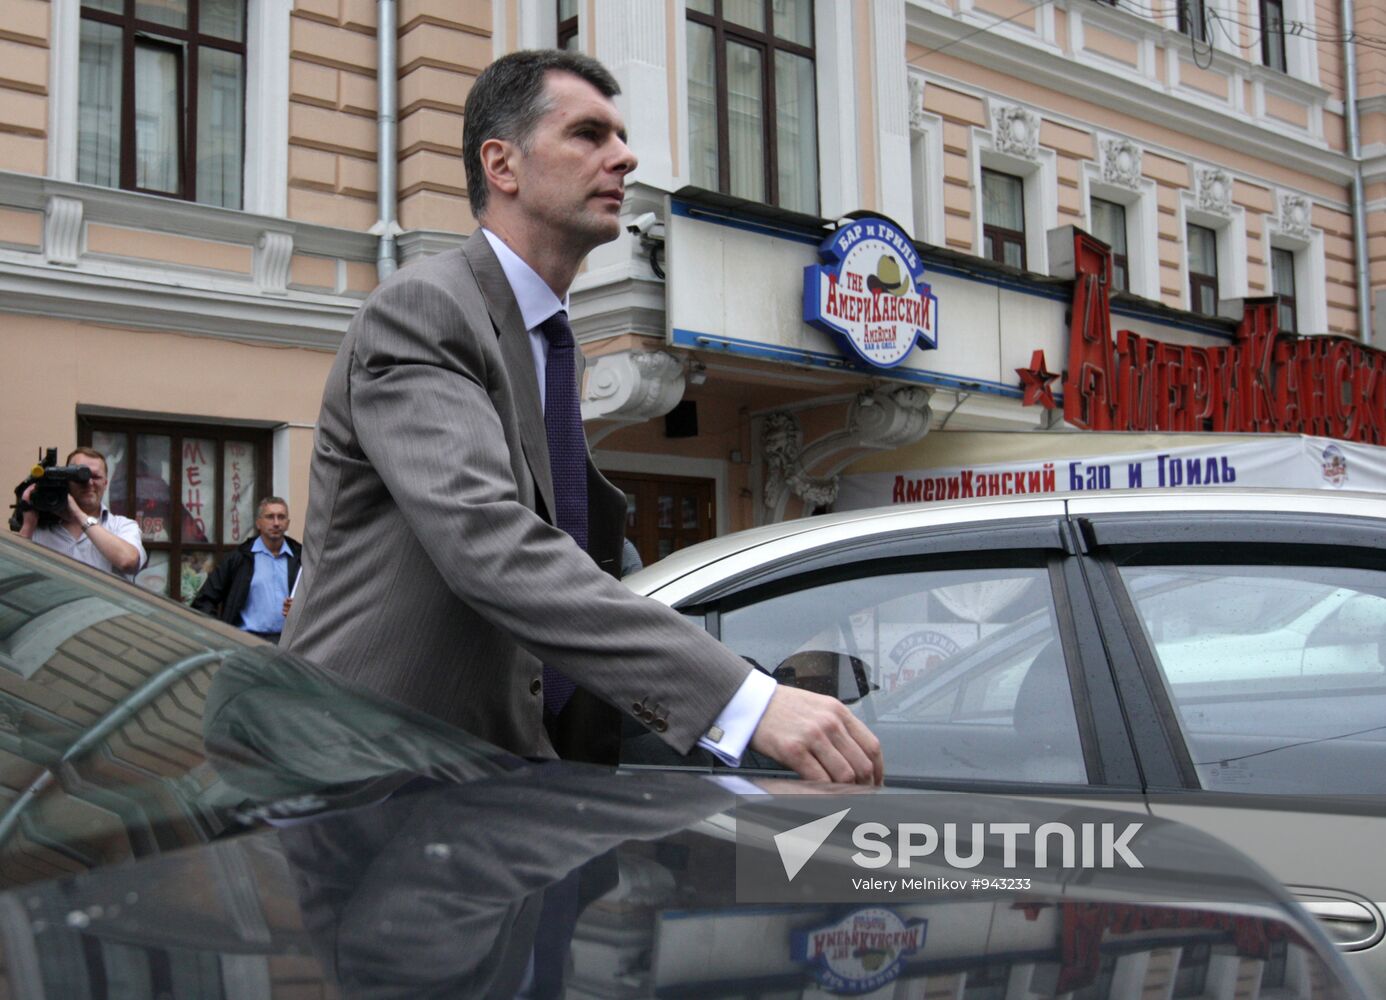 Right Cause party leader Mikhail Prokhorov gives news conference